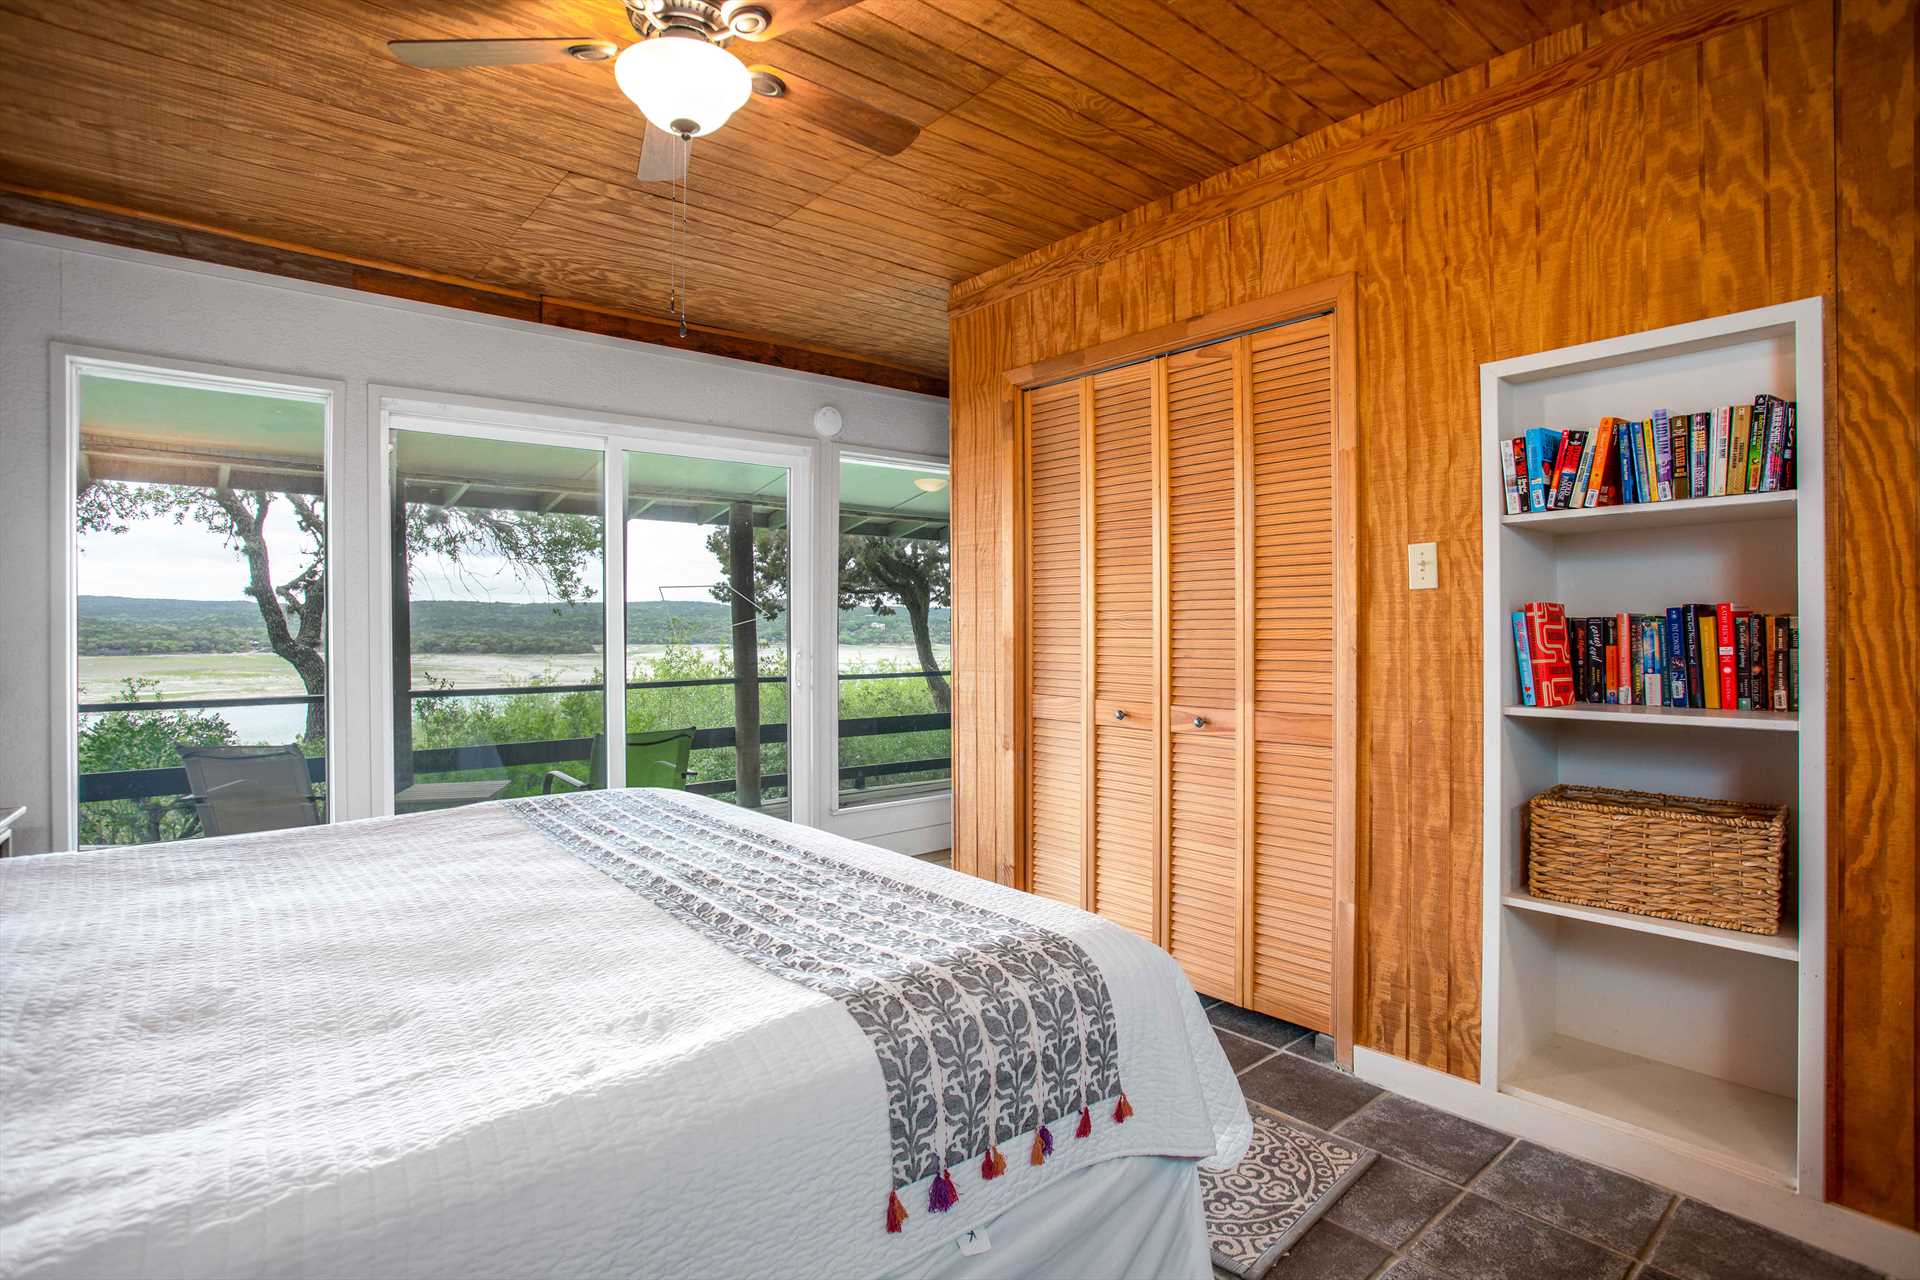                                                 Mellow woodwork and ample storage space creates a welcoming and hassle-free environment for our valued guests.